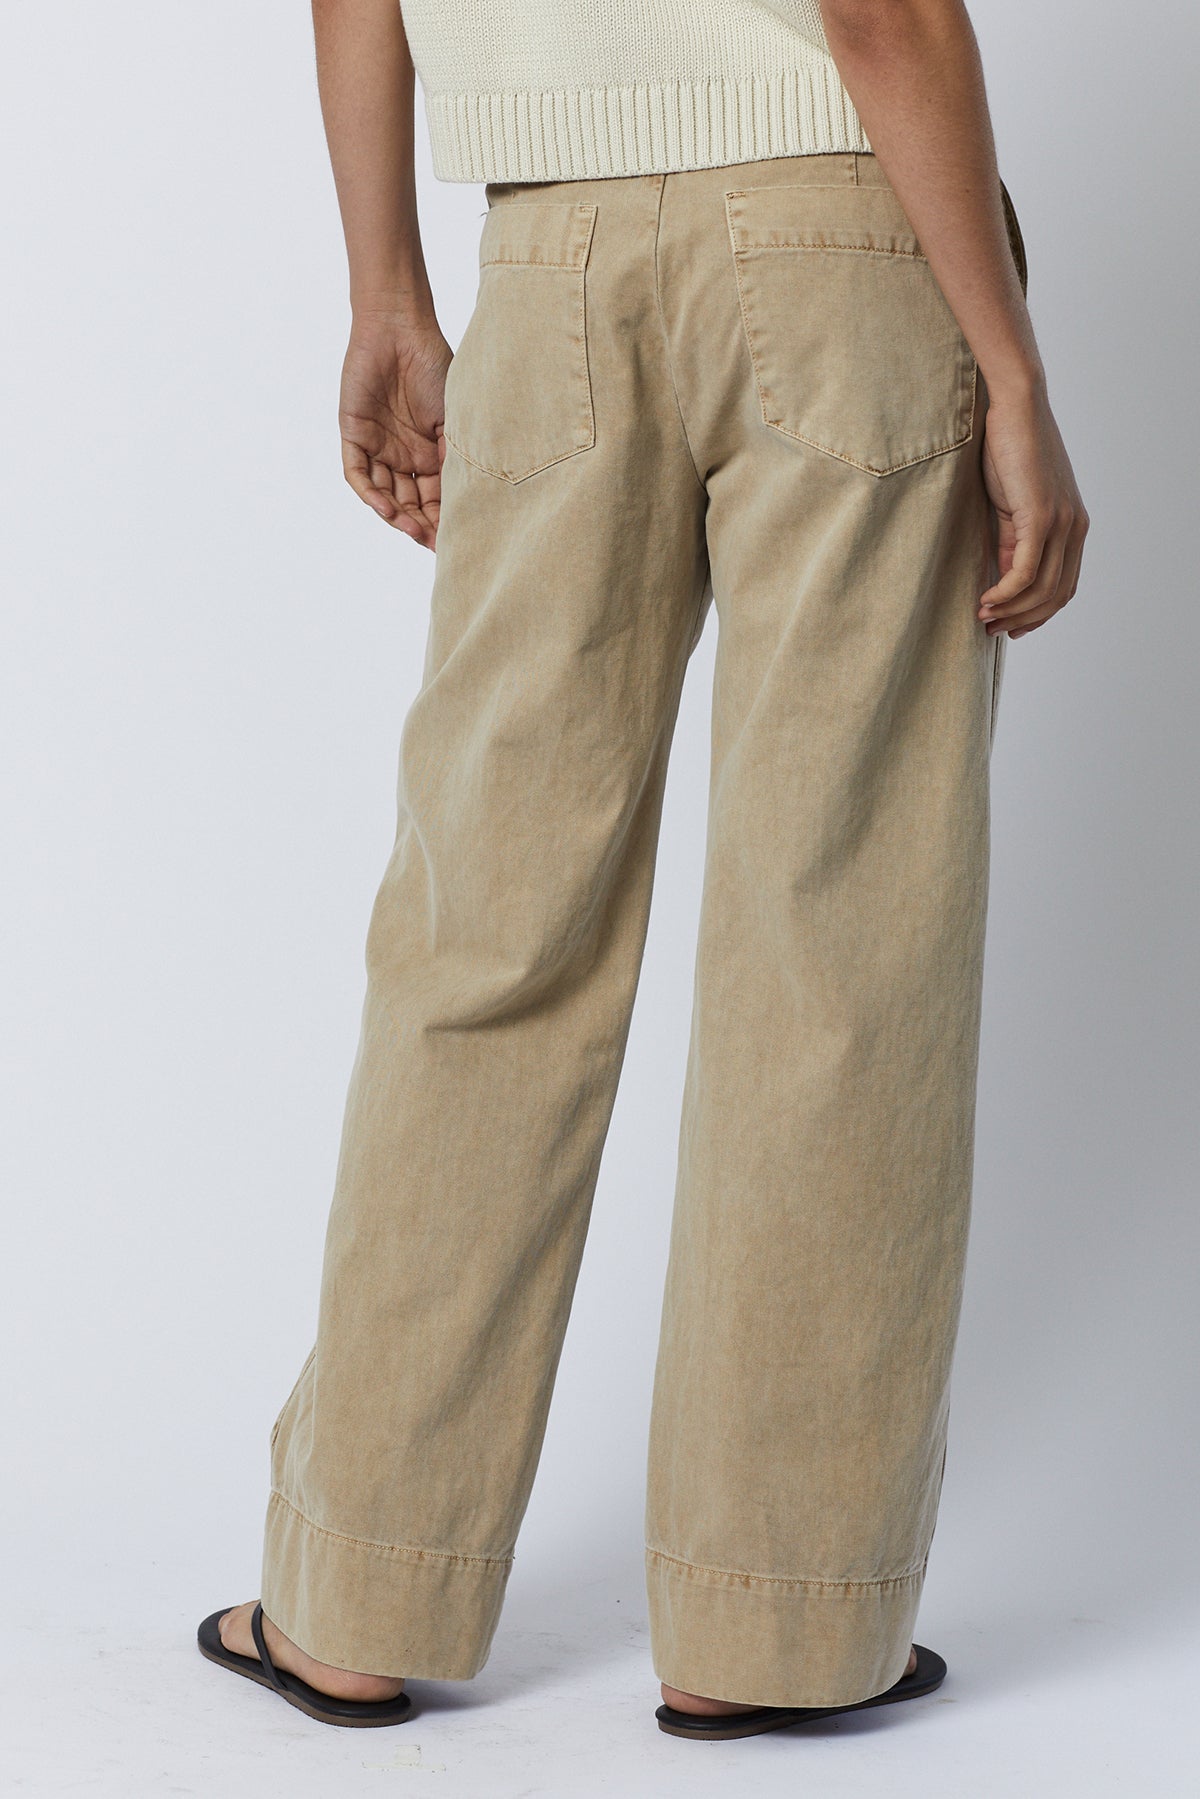   Ventura Pant in putty back 